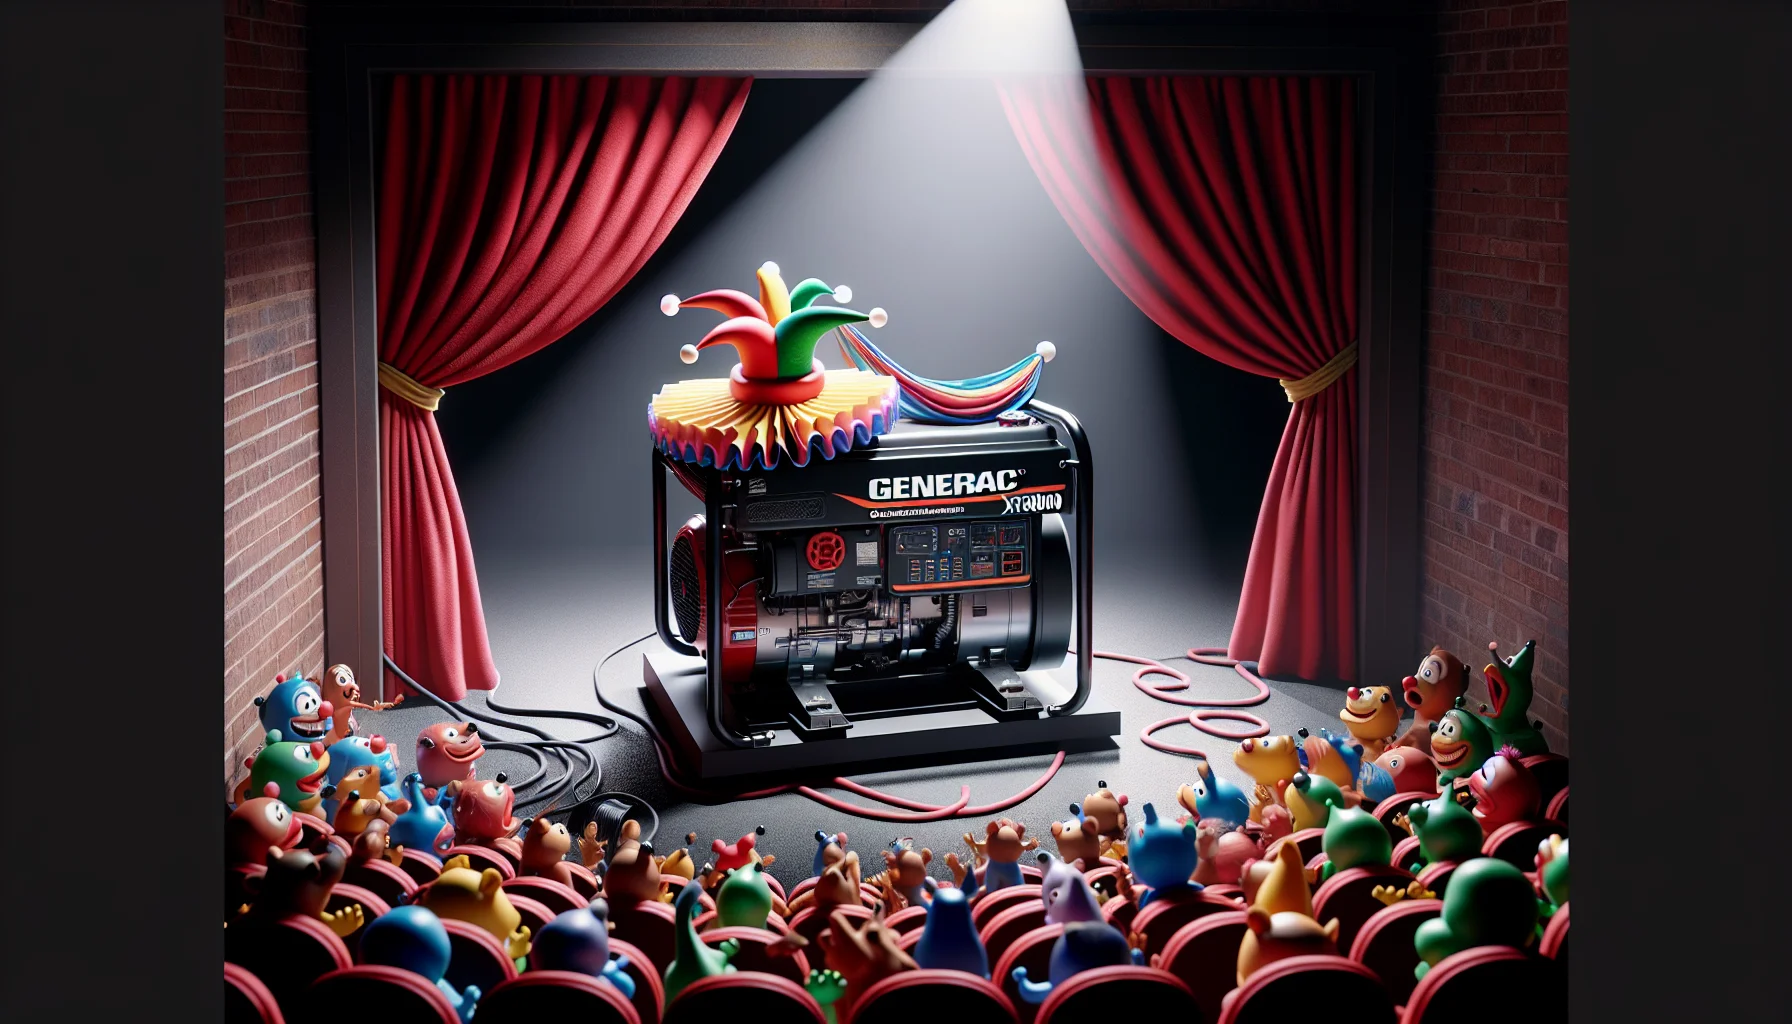 Imagine a highly detailed, realistic rendering of a Generac XT8000 Generator. This resilient power machine is placed in a humorous, unexpected environment - it's on a stage lit by a single spotlight, complete with red velvet curtains and a laughing audience. The Generator is colorfully decorated like a circus performer, complete with a ruffled clown collar and a jester’s hat, comically spinning at the top. It is surrounded by a bunch of amused cartoon animals usually solar-powered or battery-powered, eagerly waiting for it to generate electricity. The scene has a humorous and lively vibe, reflecting the joy of unlimited power.